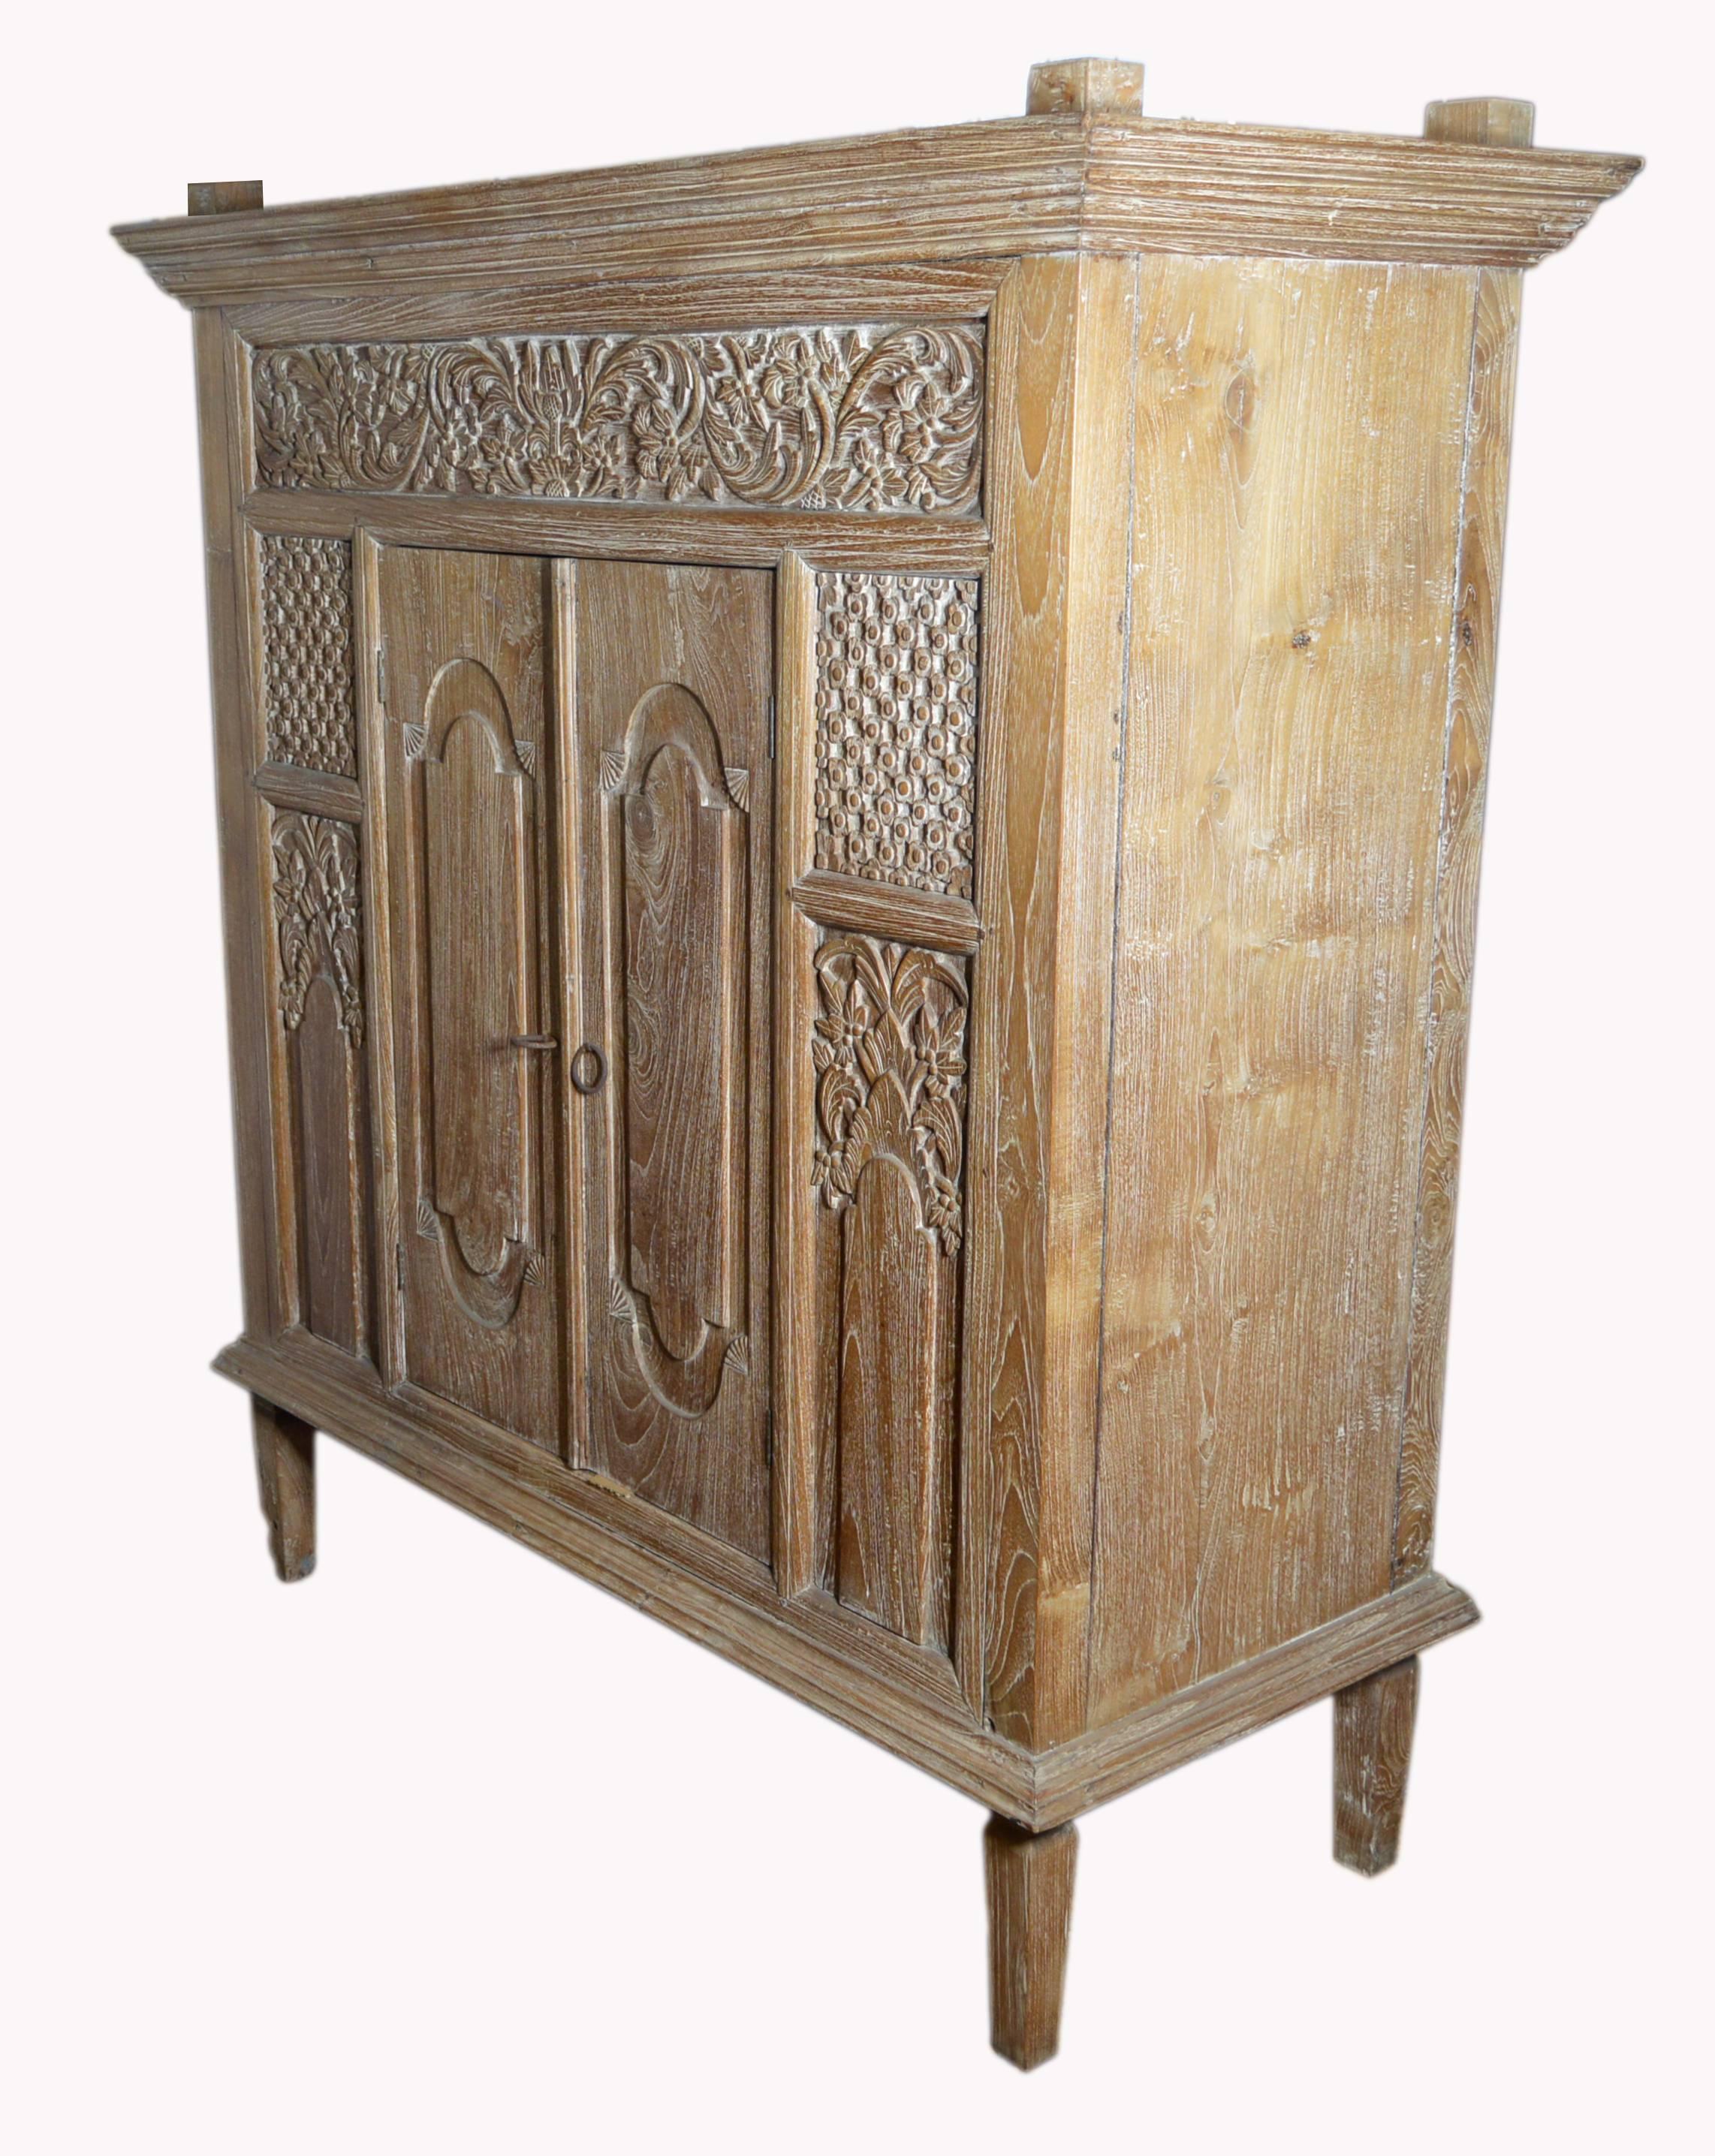 Wood Antique Hand-Carved White Washed Teak Cabinet with Scrollwork and Paneled Doors